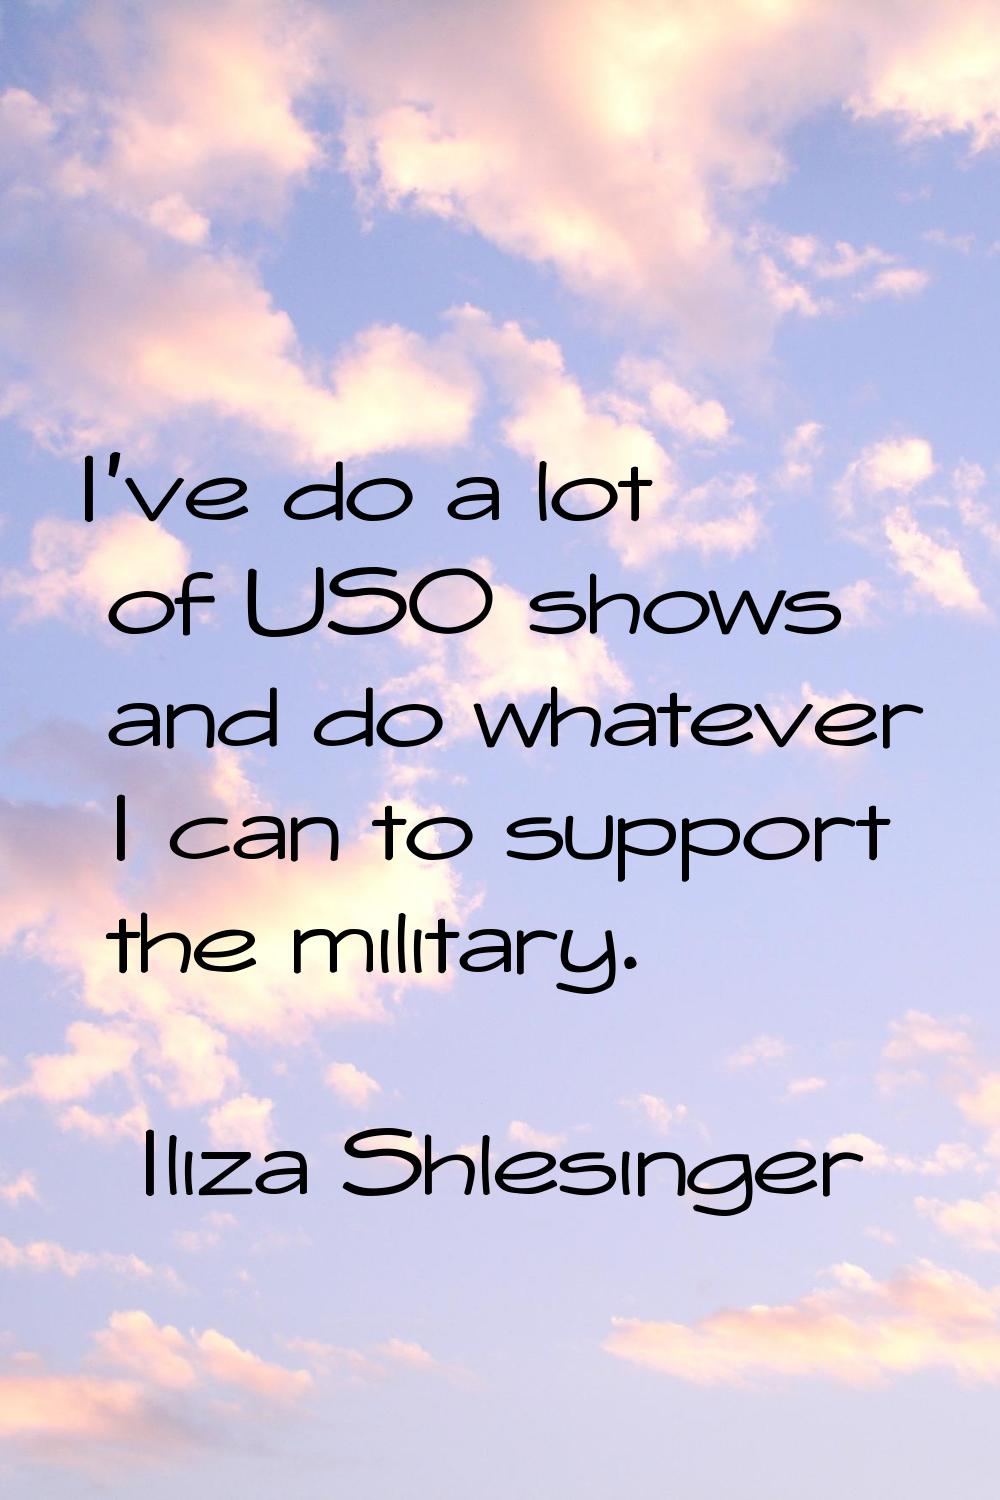 I've do a lot of USO shows and do whatever I can to support the military.